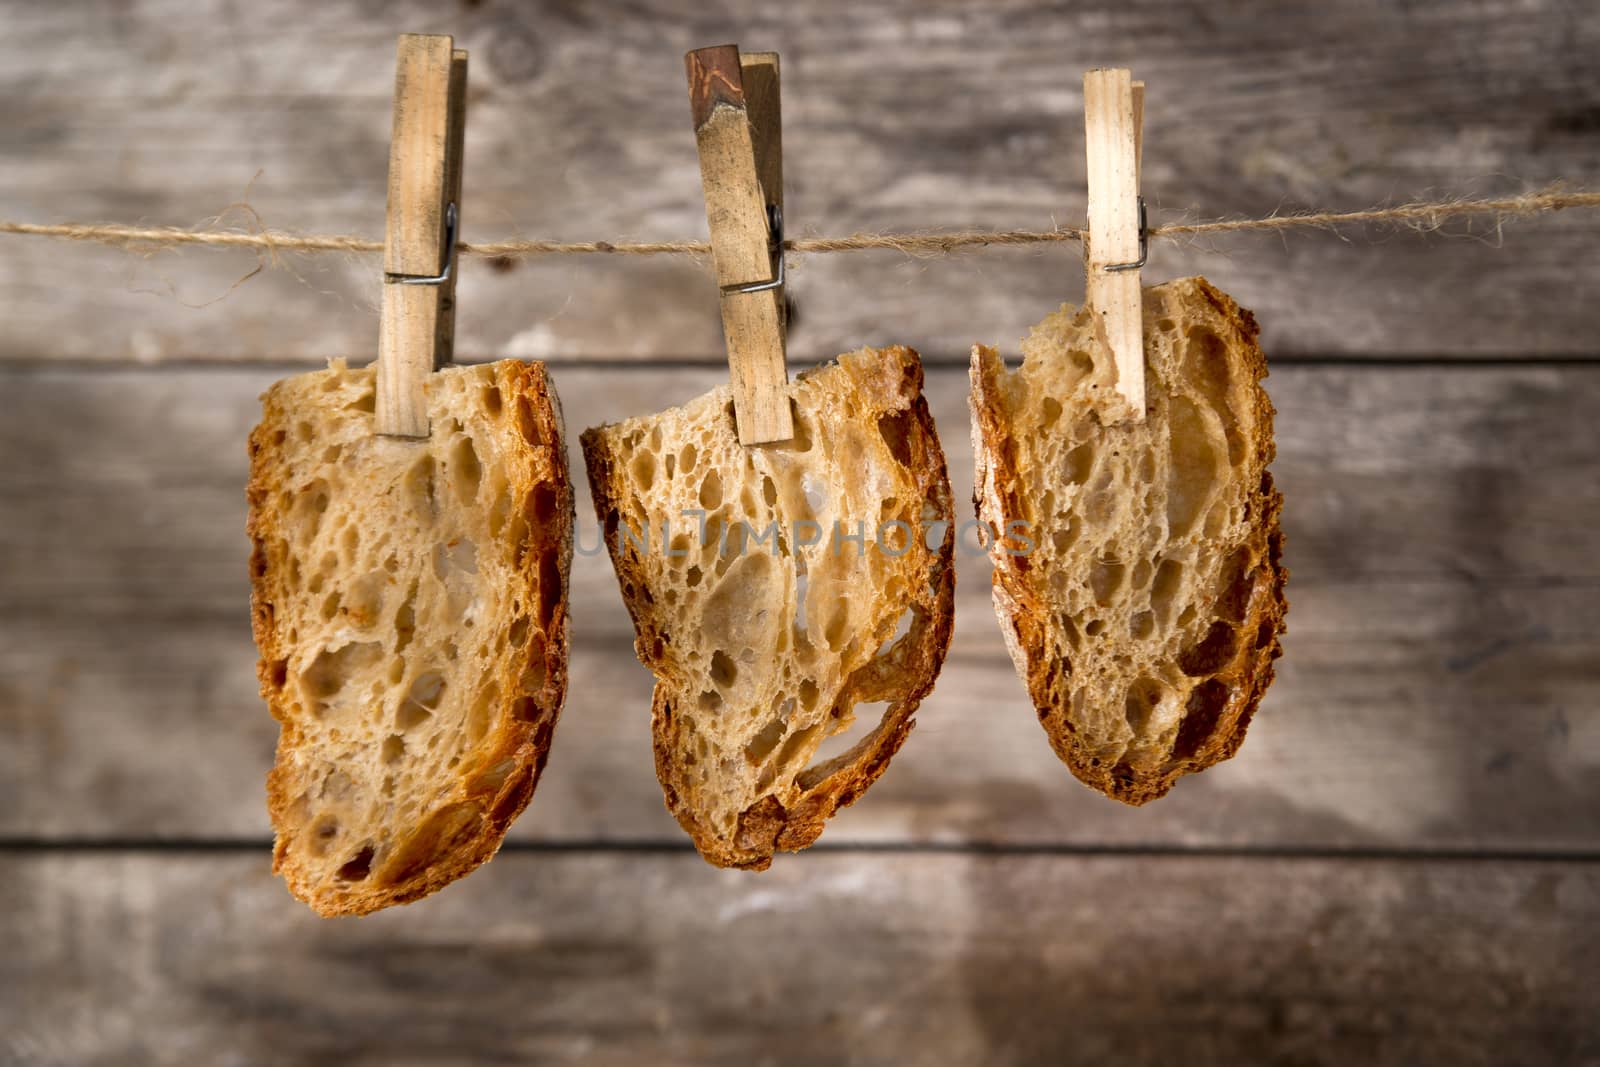 Slice of whole wheat bread sourdough baked in a wood oven hanging

